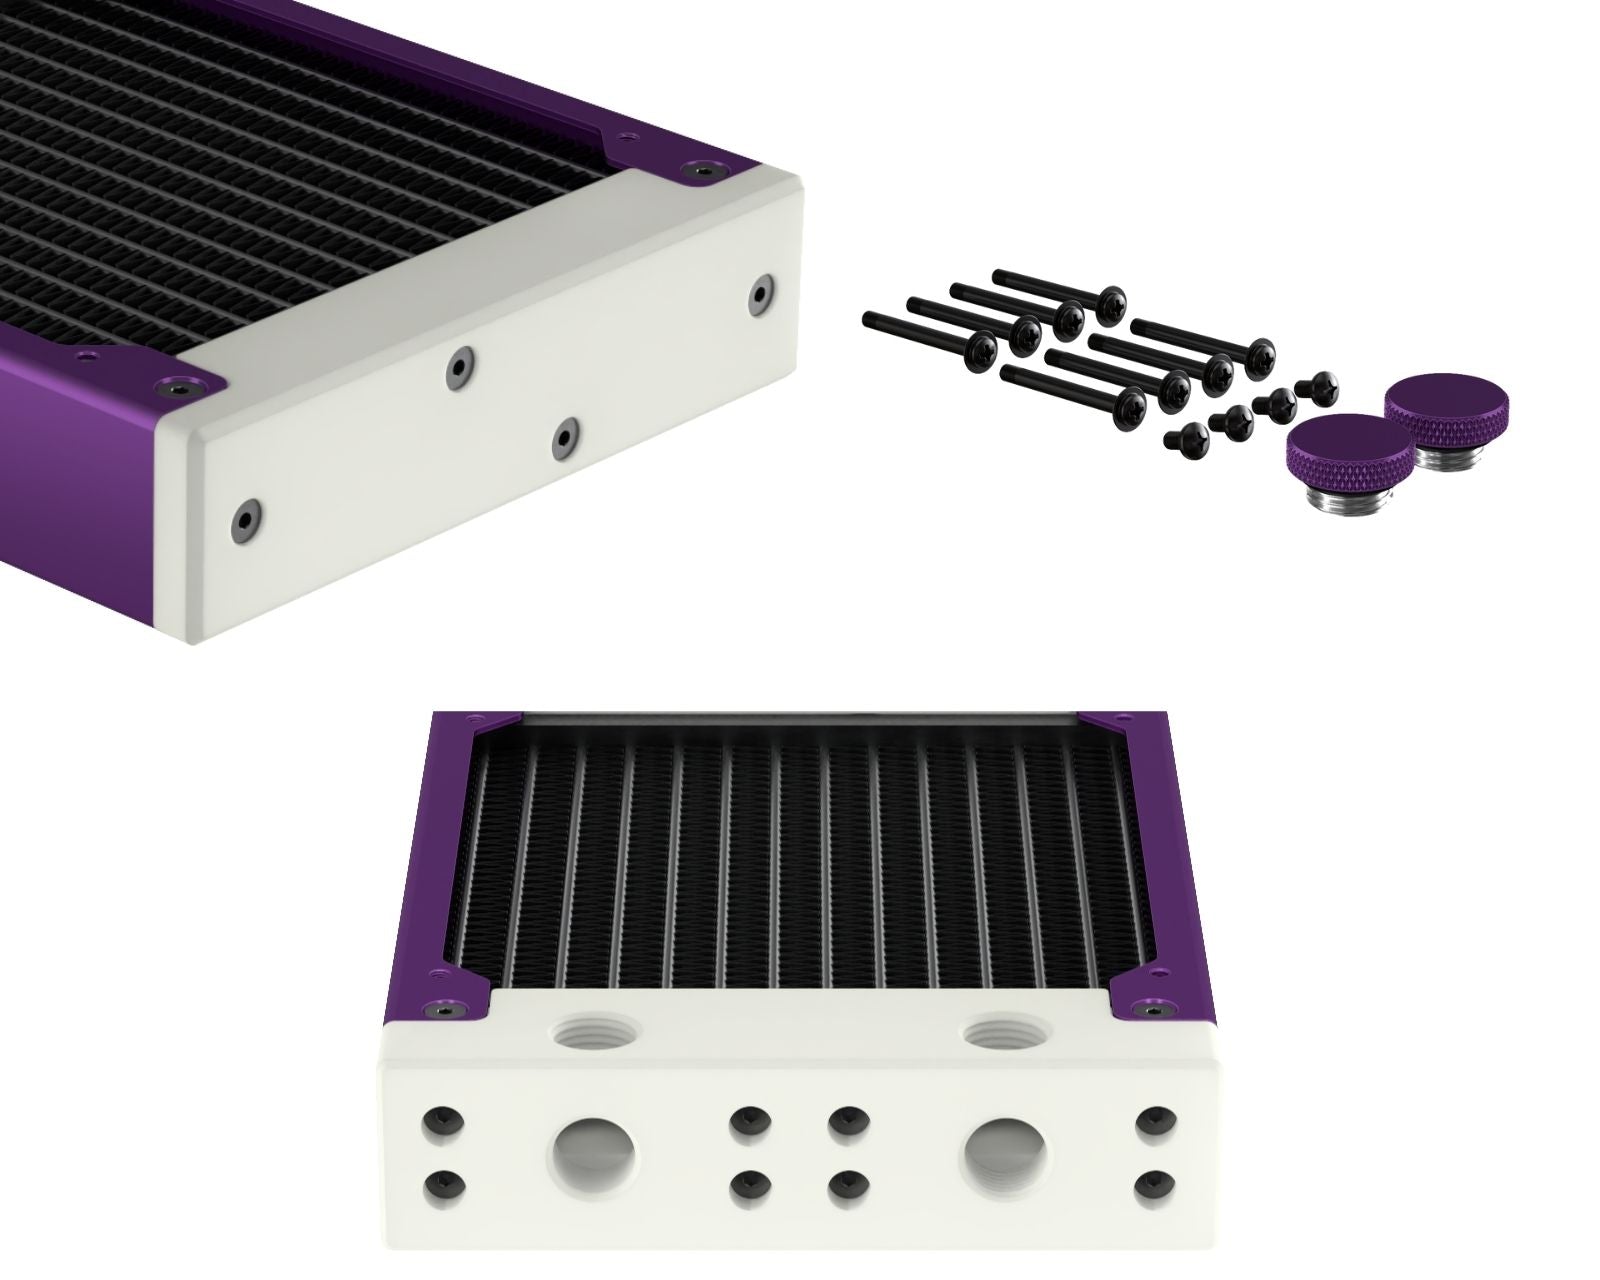 PrimoChill 240SL (30mm) EXIMO Modular Radiator, White POM, 2x120mm, Dual Fan (R-SL-W24) Available in 20+ Colors, Assembled in USA and Custom Watercooling Loop Ready - Candy Purple